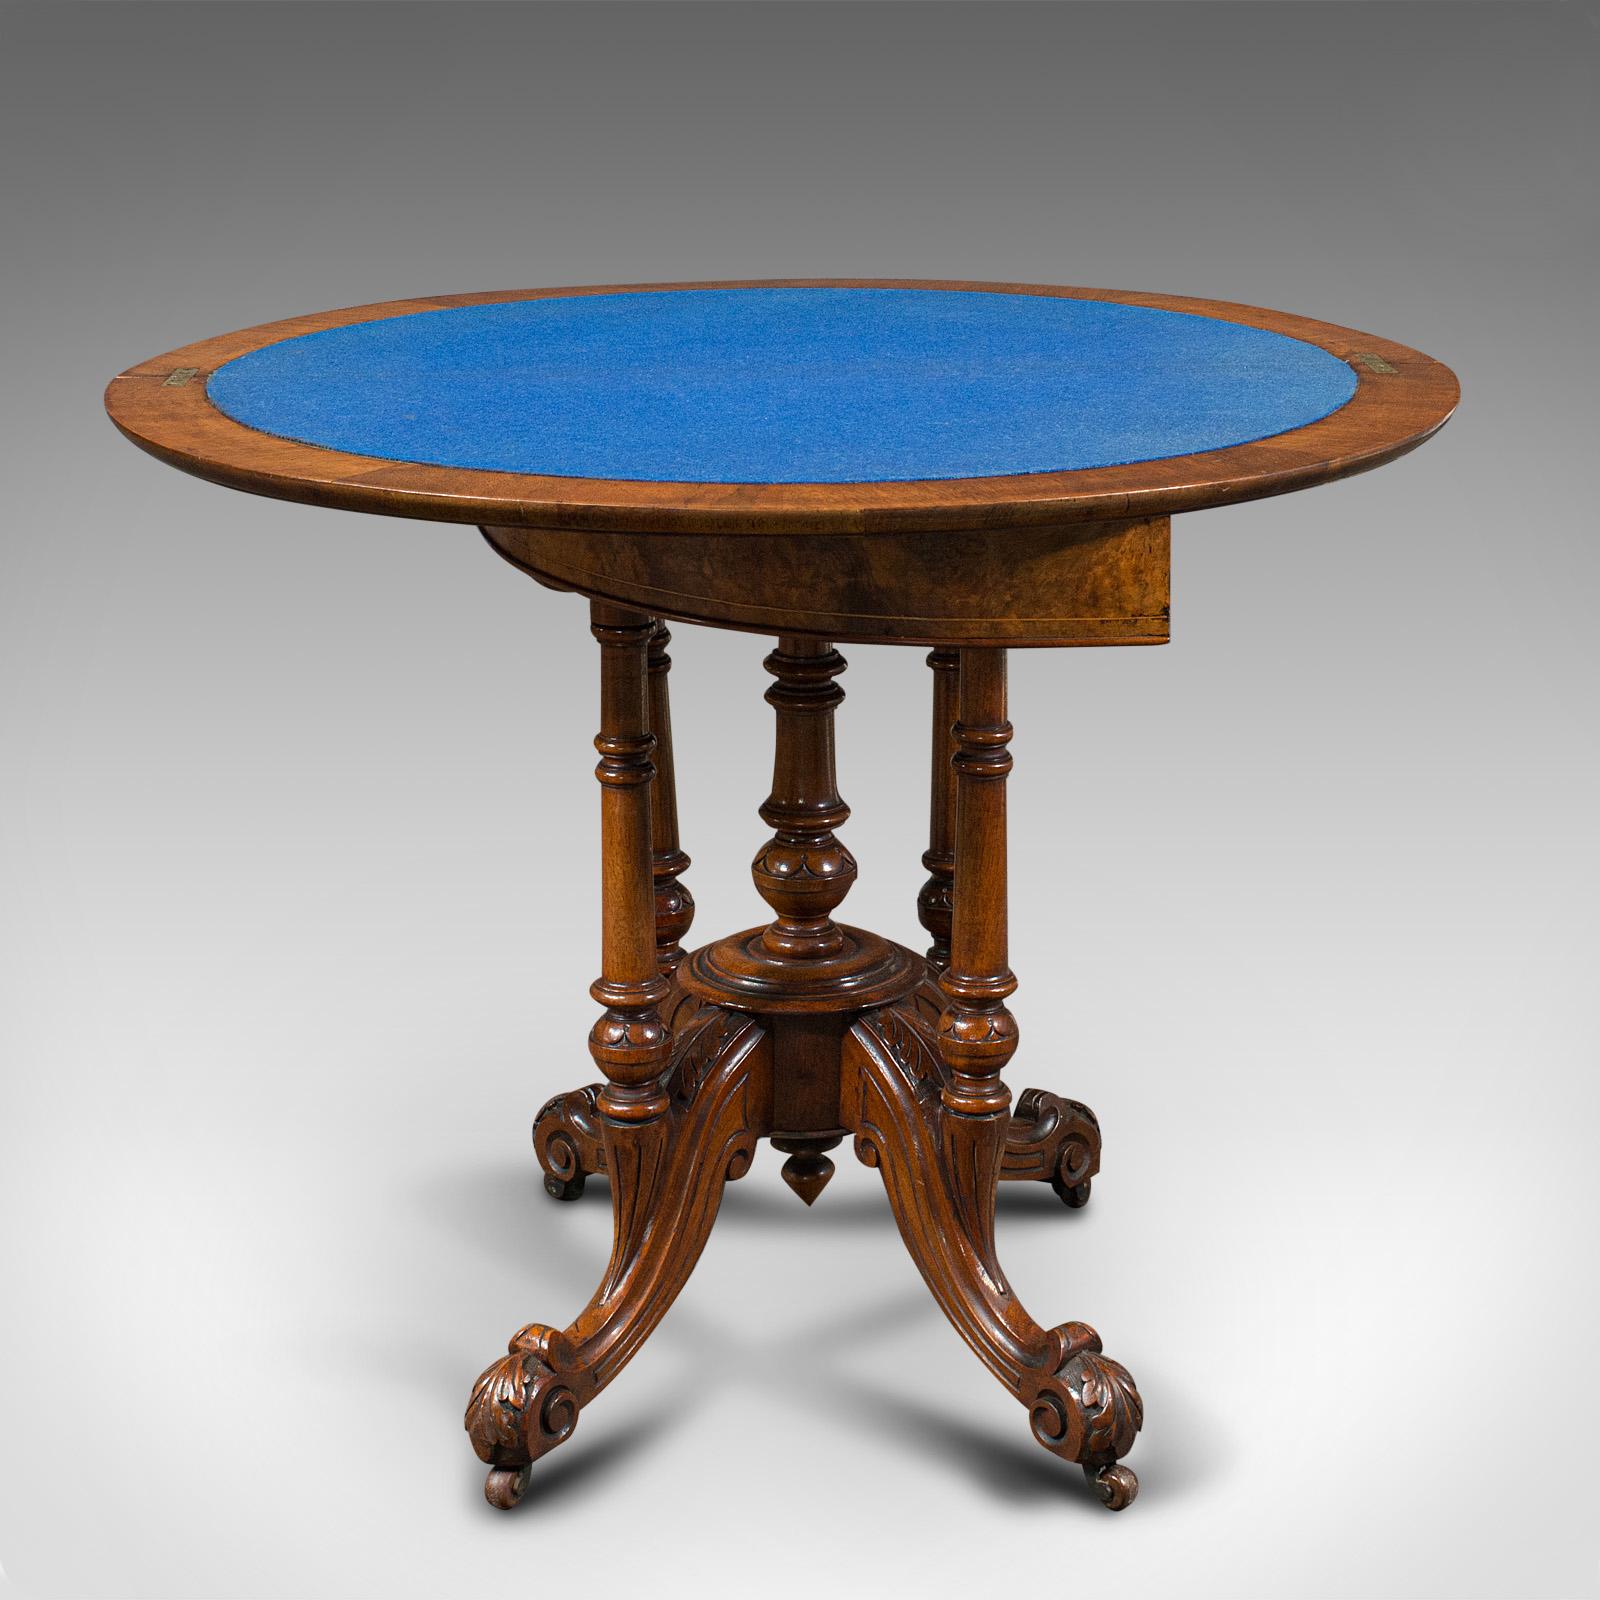 19th Century Antique Demi Lune Folding Card Table, English, Walnut, Games, Side, Victorian